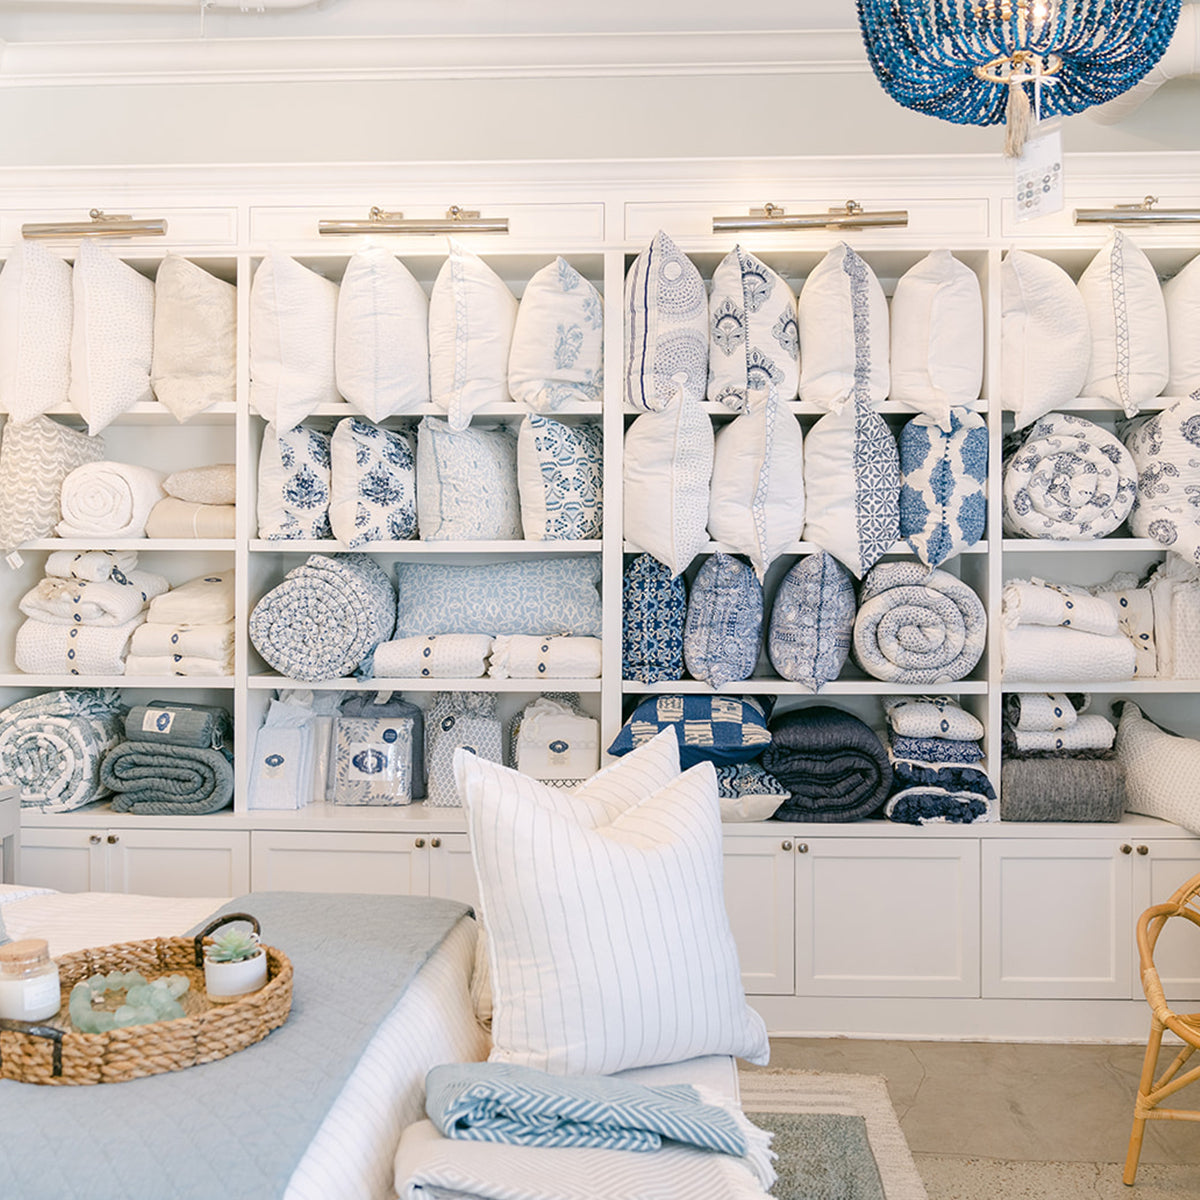 Waterleaf Home featured bedding, pillows, and throws showroom.